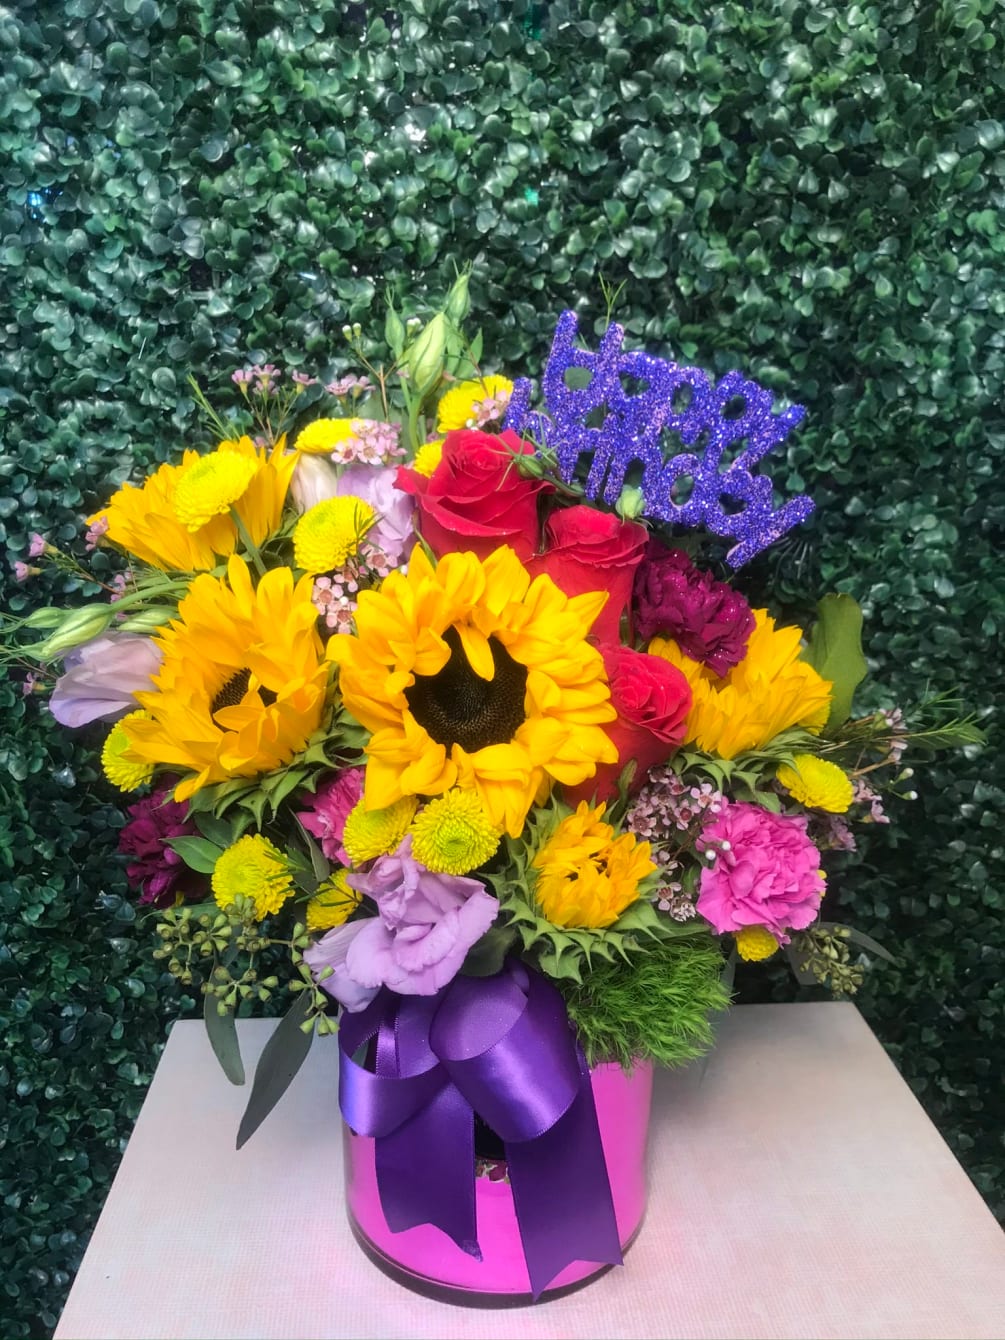 SUNFLOWERS, YELLOW BOTTON, PURPLE AND LAVANDER CARNATIONS, WITH AROMATIC EUCALYPTUS IN HOT